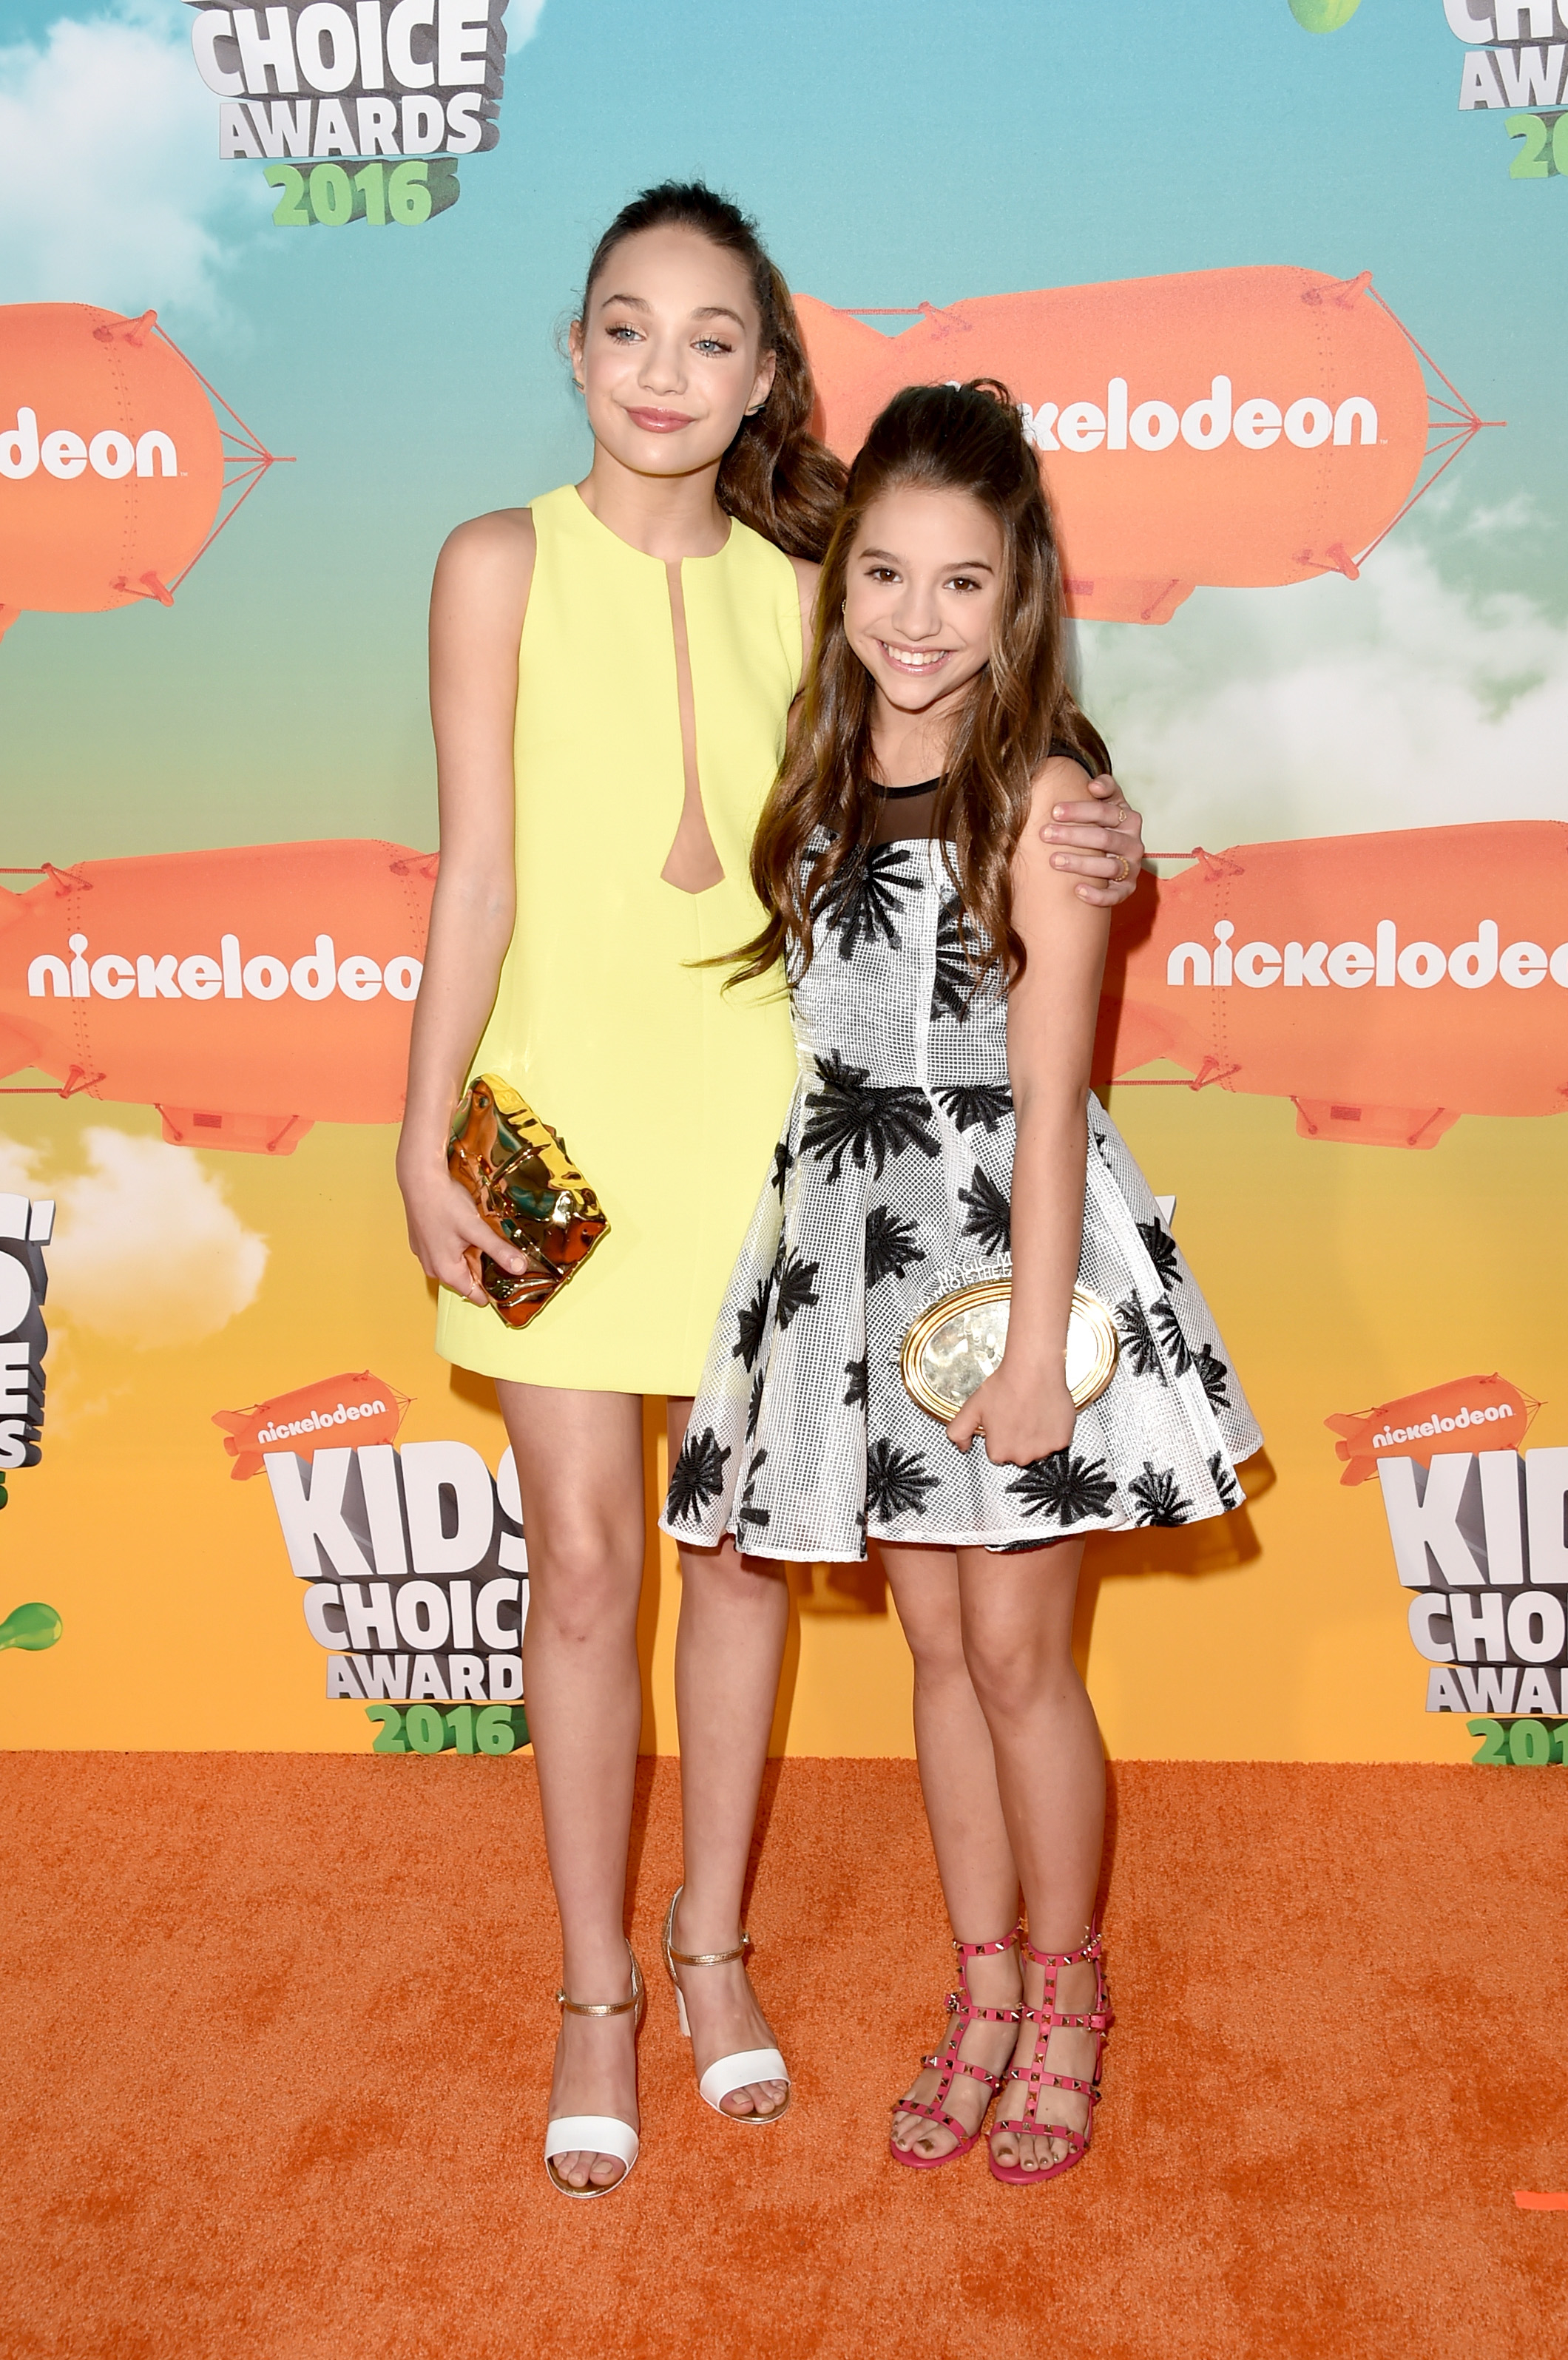 two young dancers at a nickelodeon event